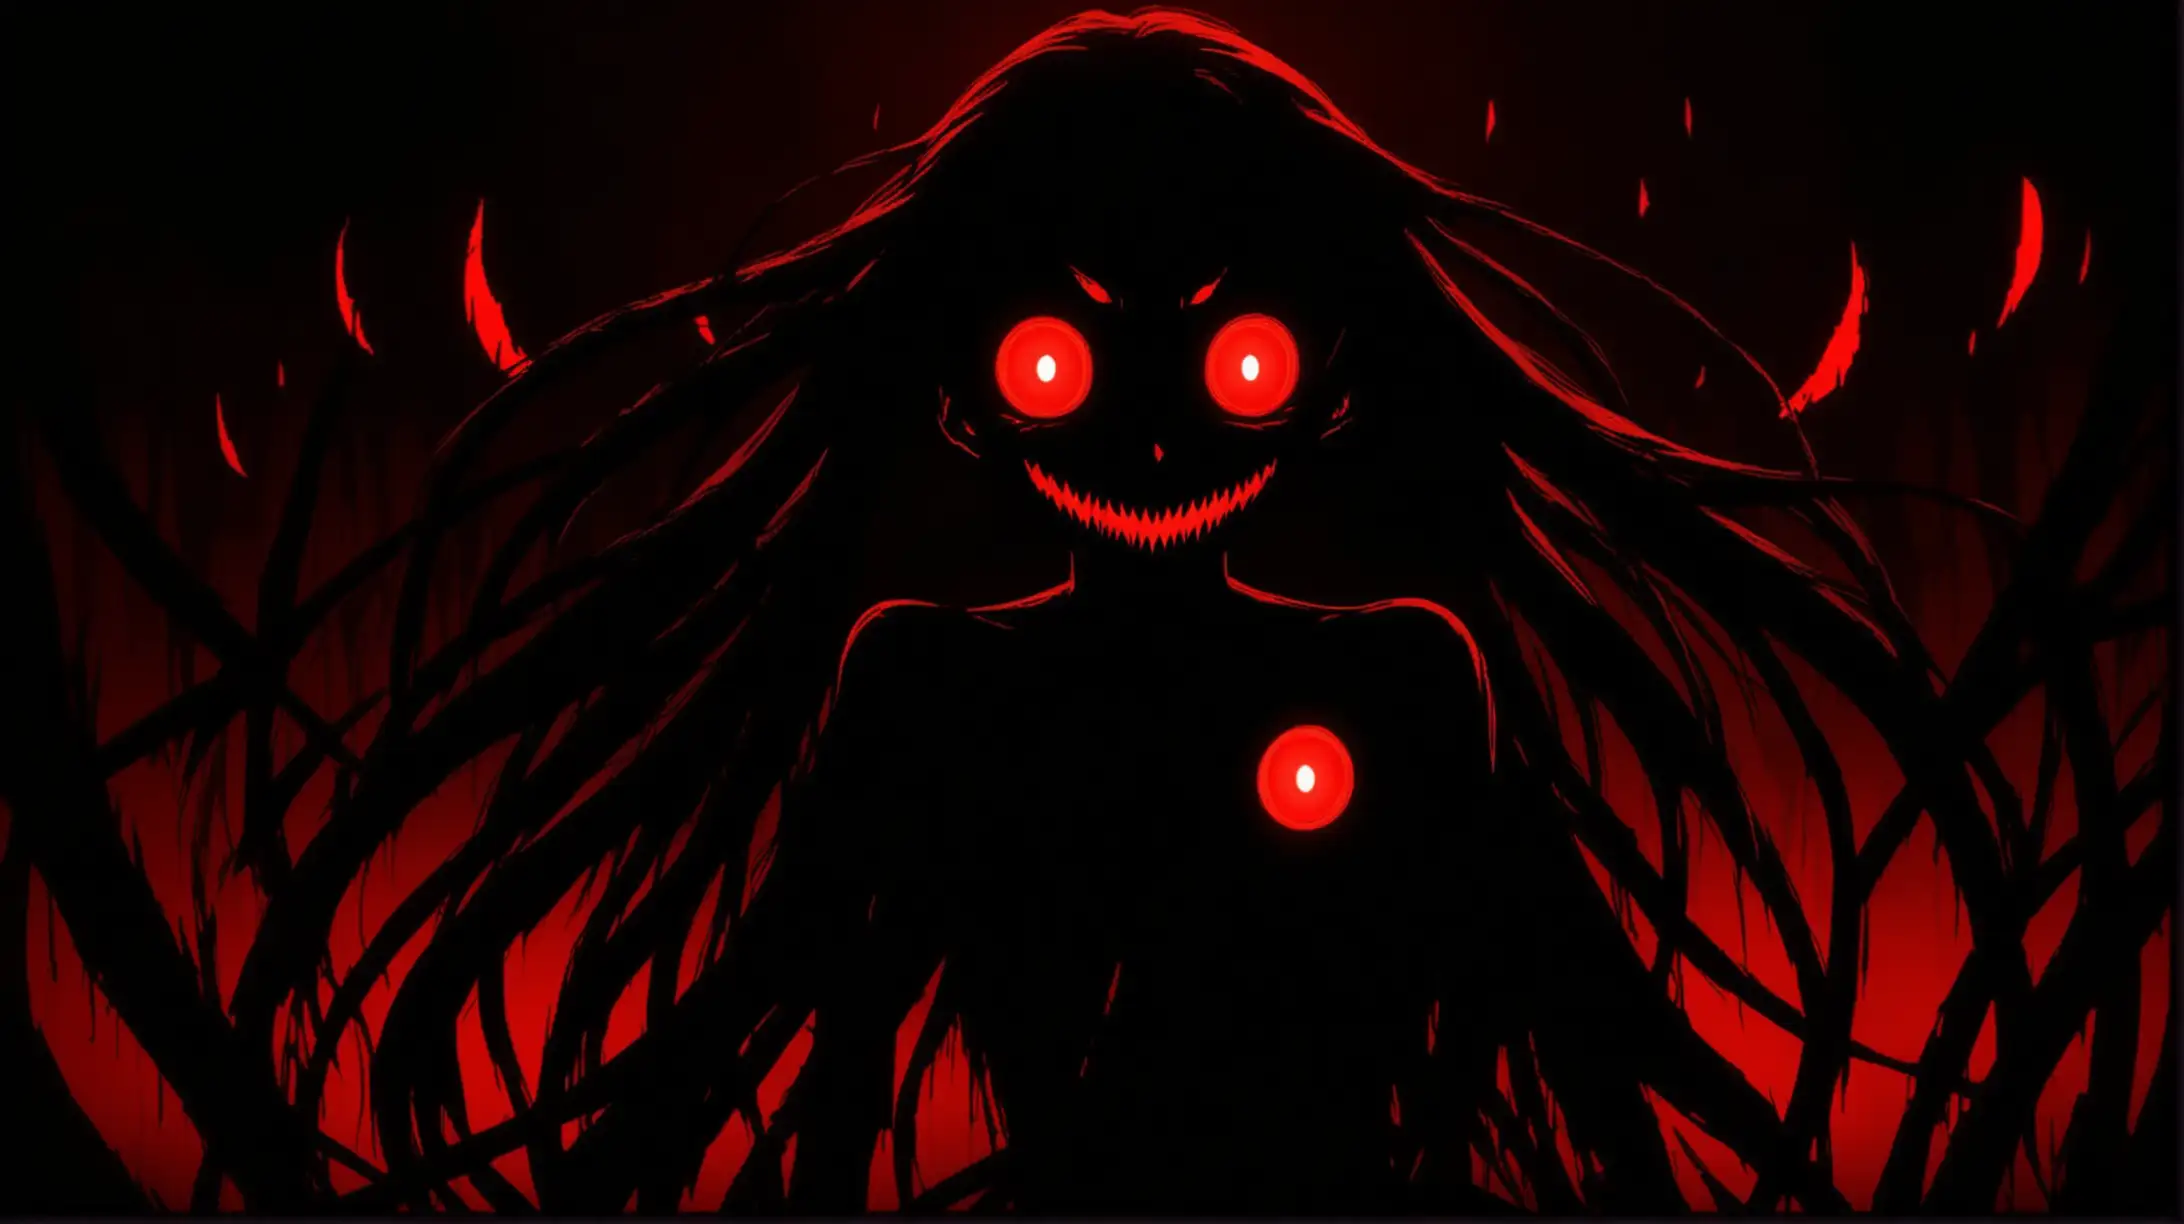 Sinister Anime Girl with Glowing Eyes on Dark Background